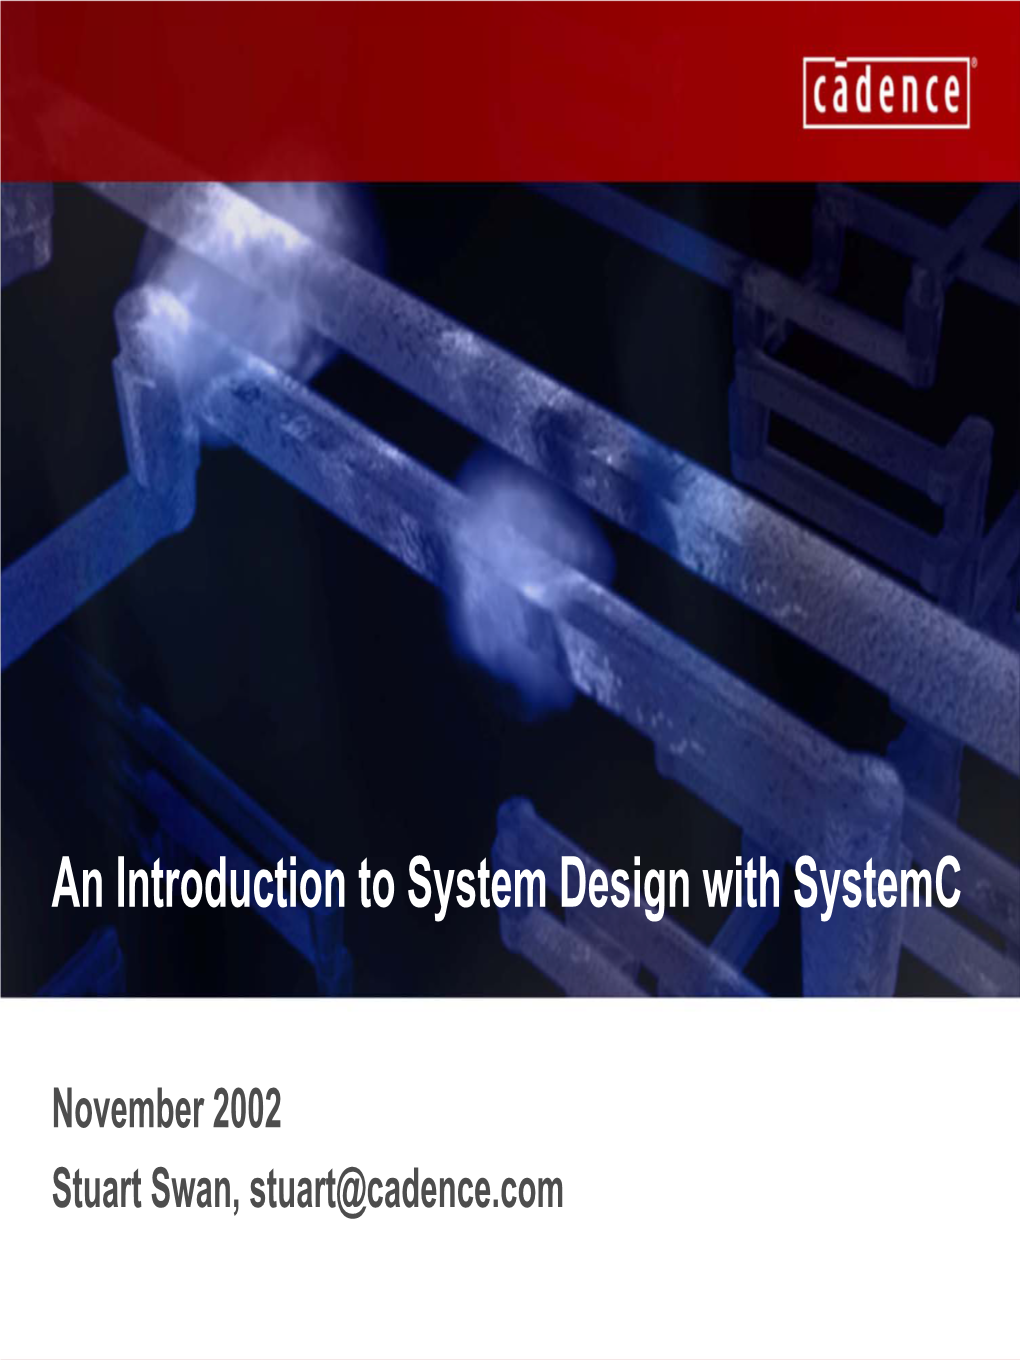 An Introduction to System Design with Systemc